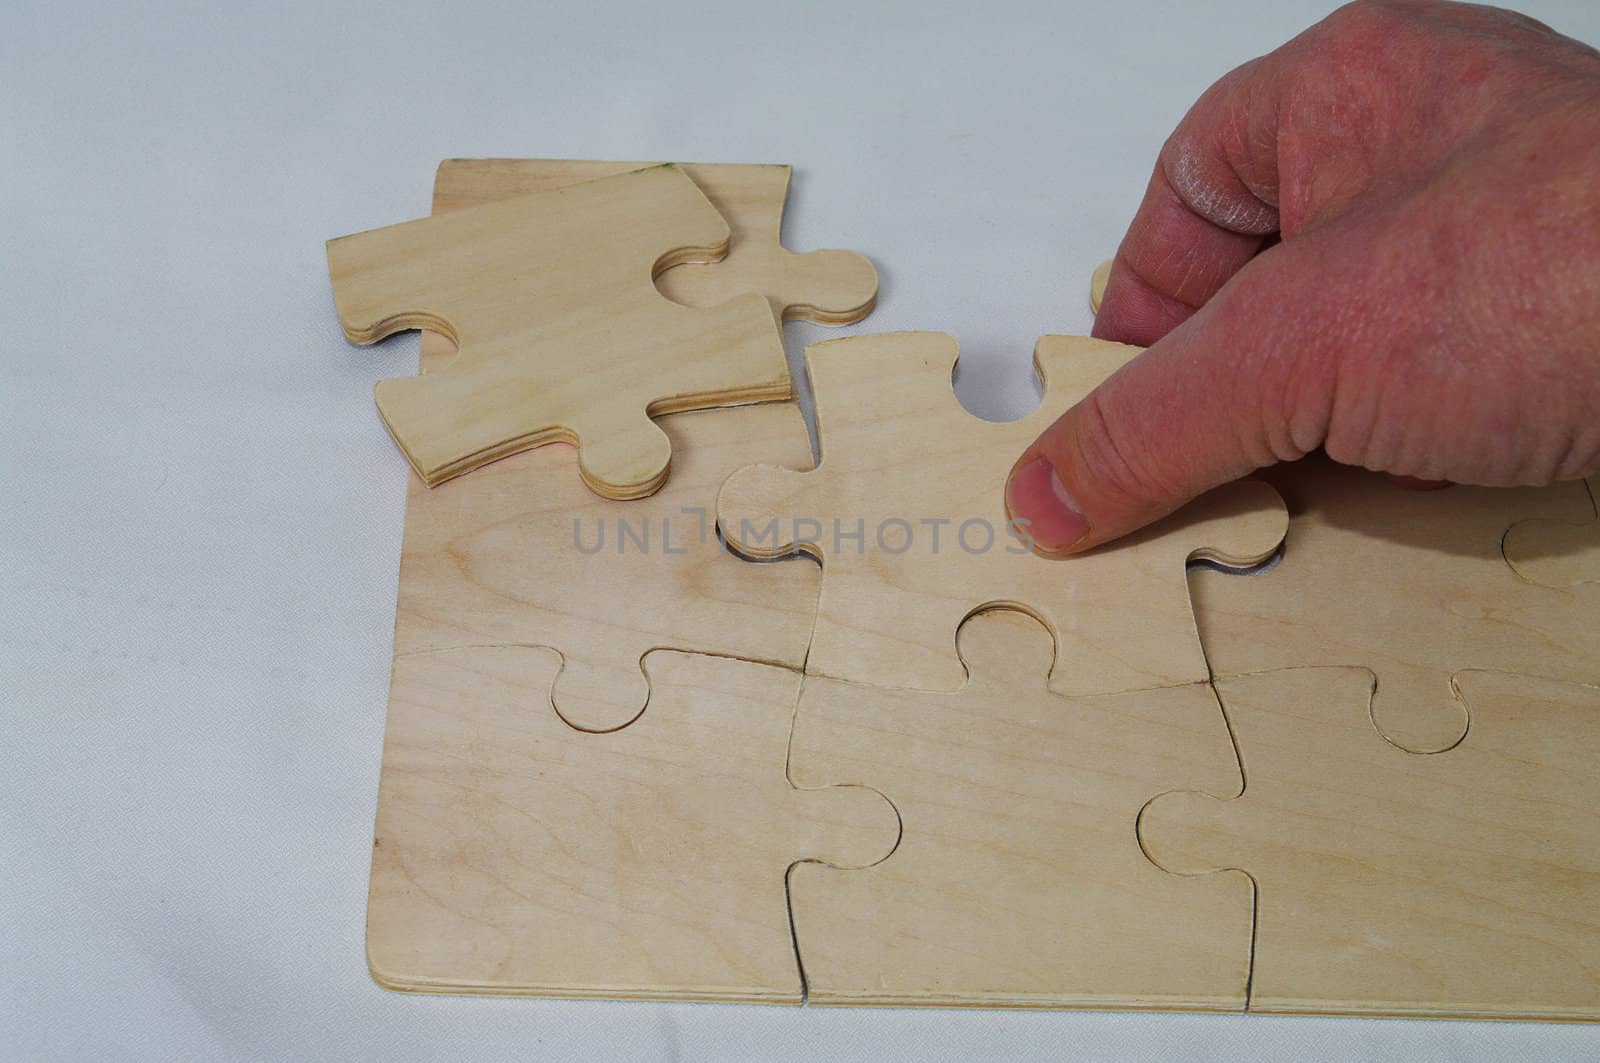 A puzzle being put together